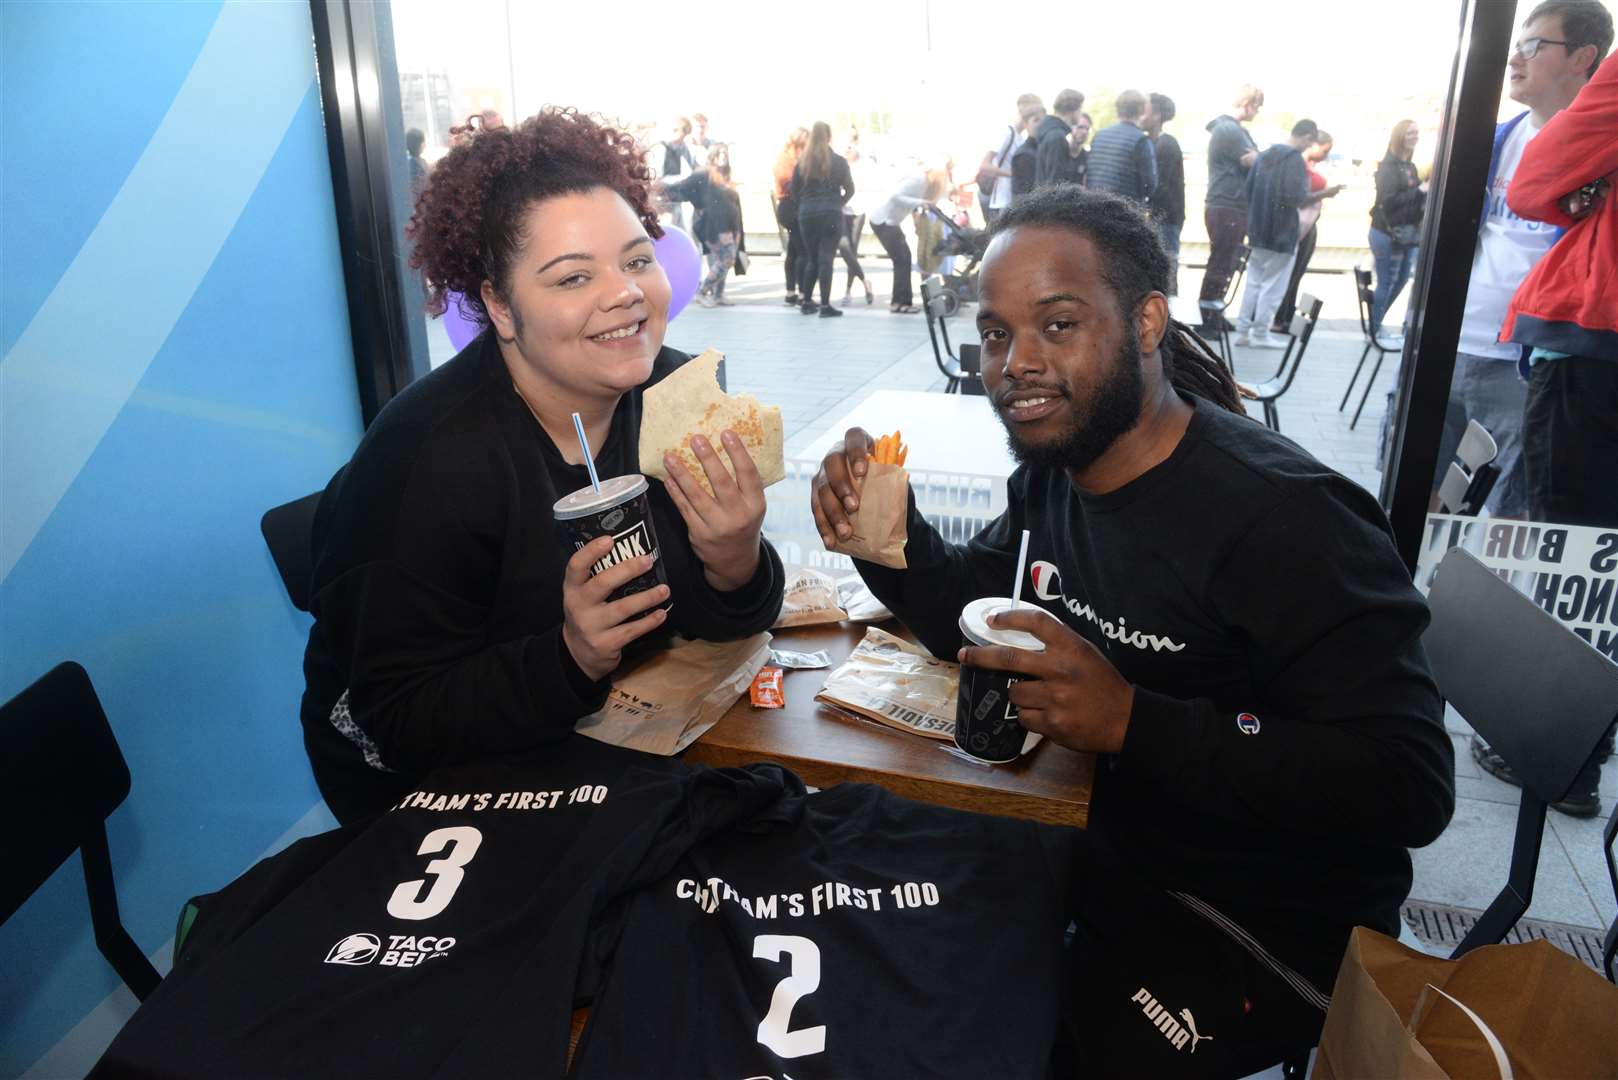 Lilly Crawford and Dylan Williams were the 3rd and 2nd customers at the opening of the Taco Bell at The Quays, Dock Head Road, St Mary's Island, Chatham on Wednesday. Picture: Chris Davey..... (10357990)